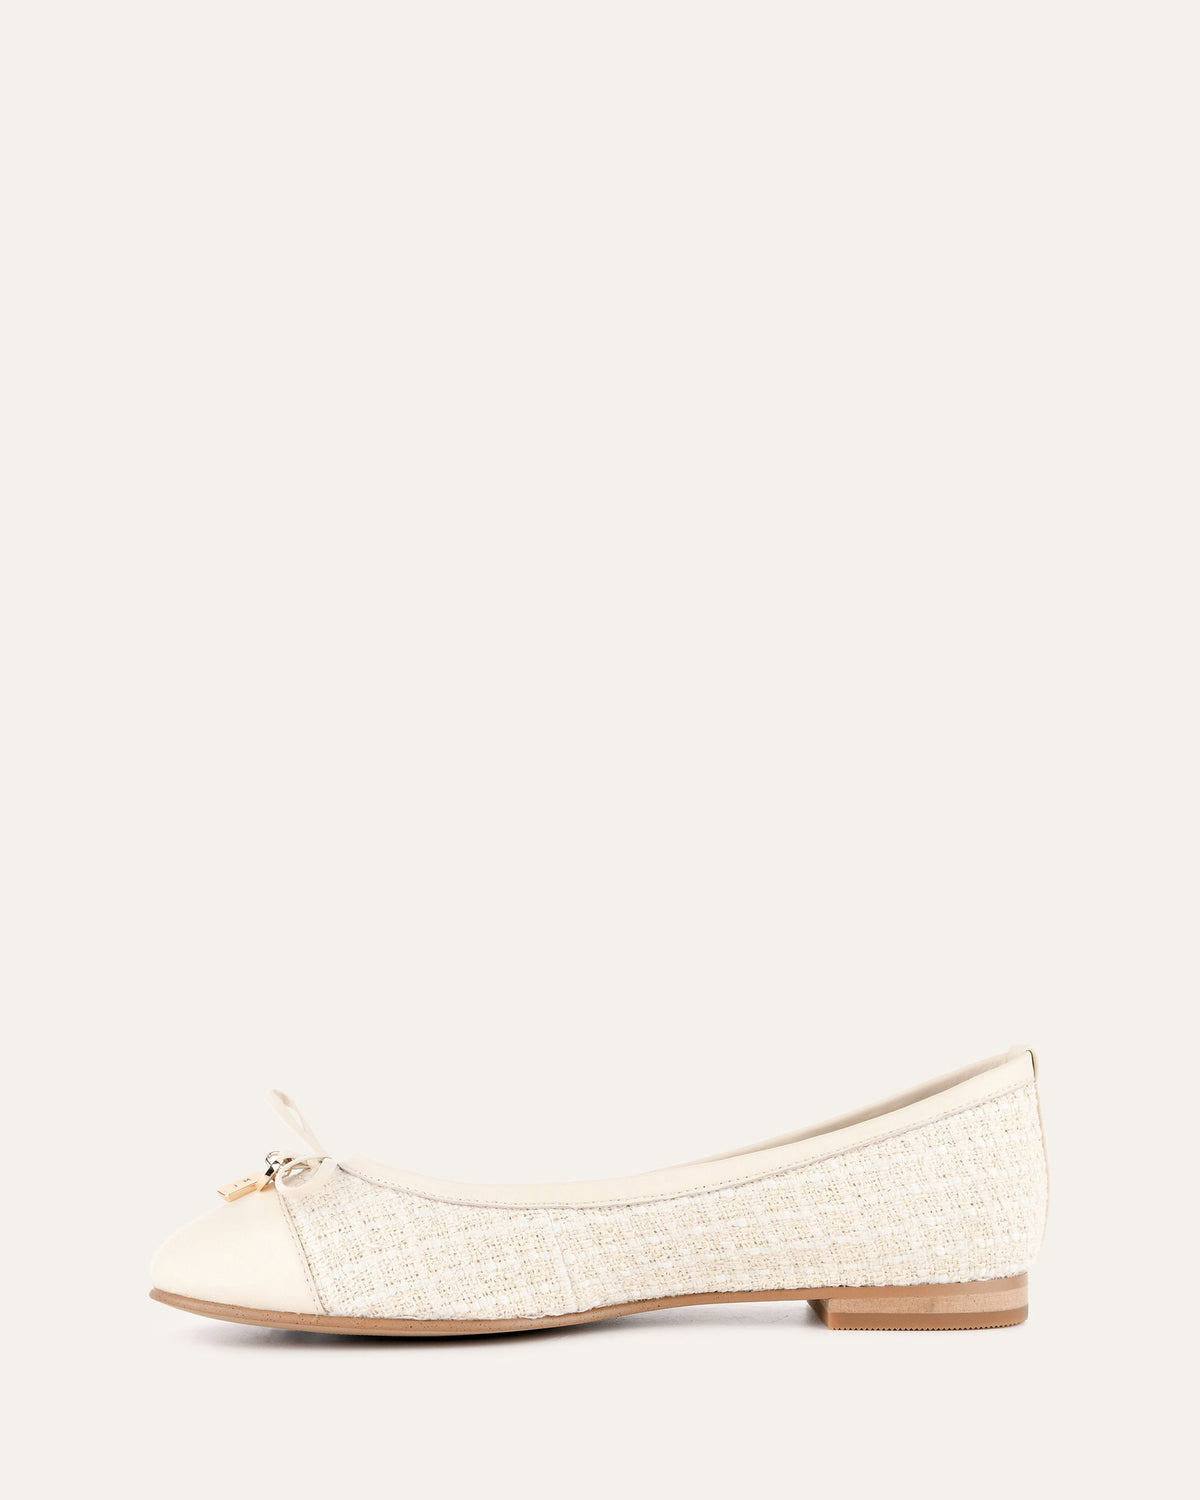 HERMIONE DRESS FLATS OFF WHITE WOVEN